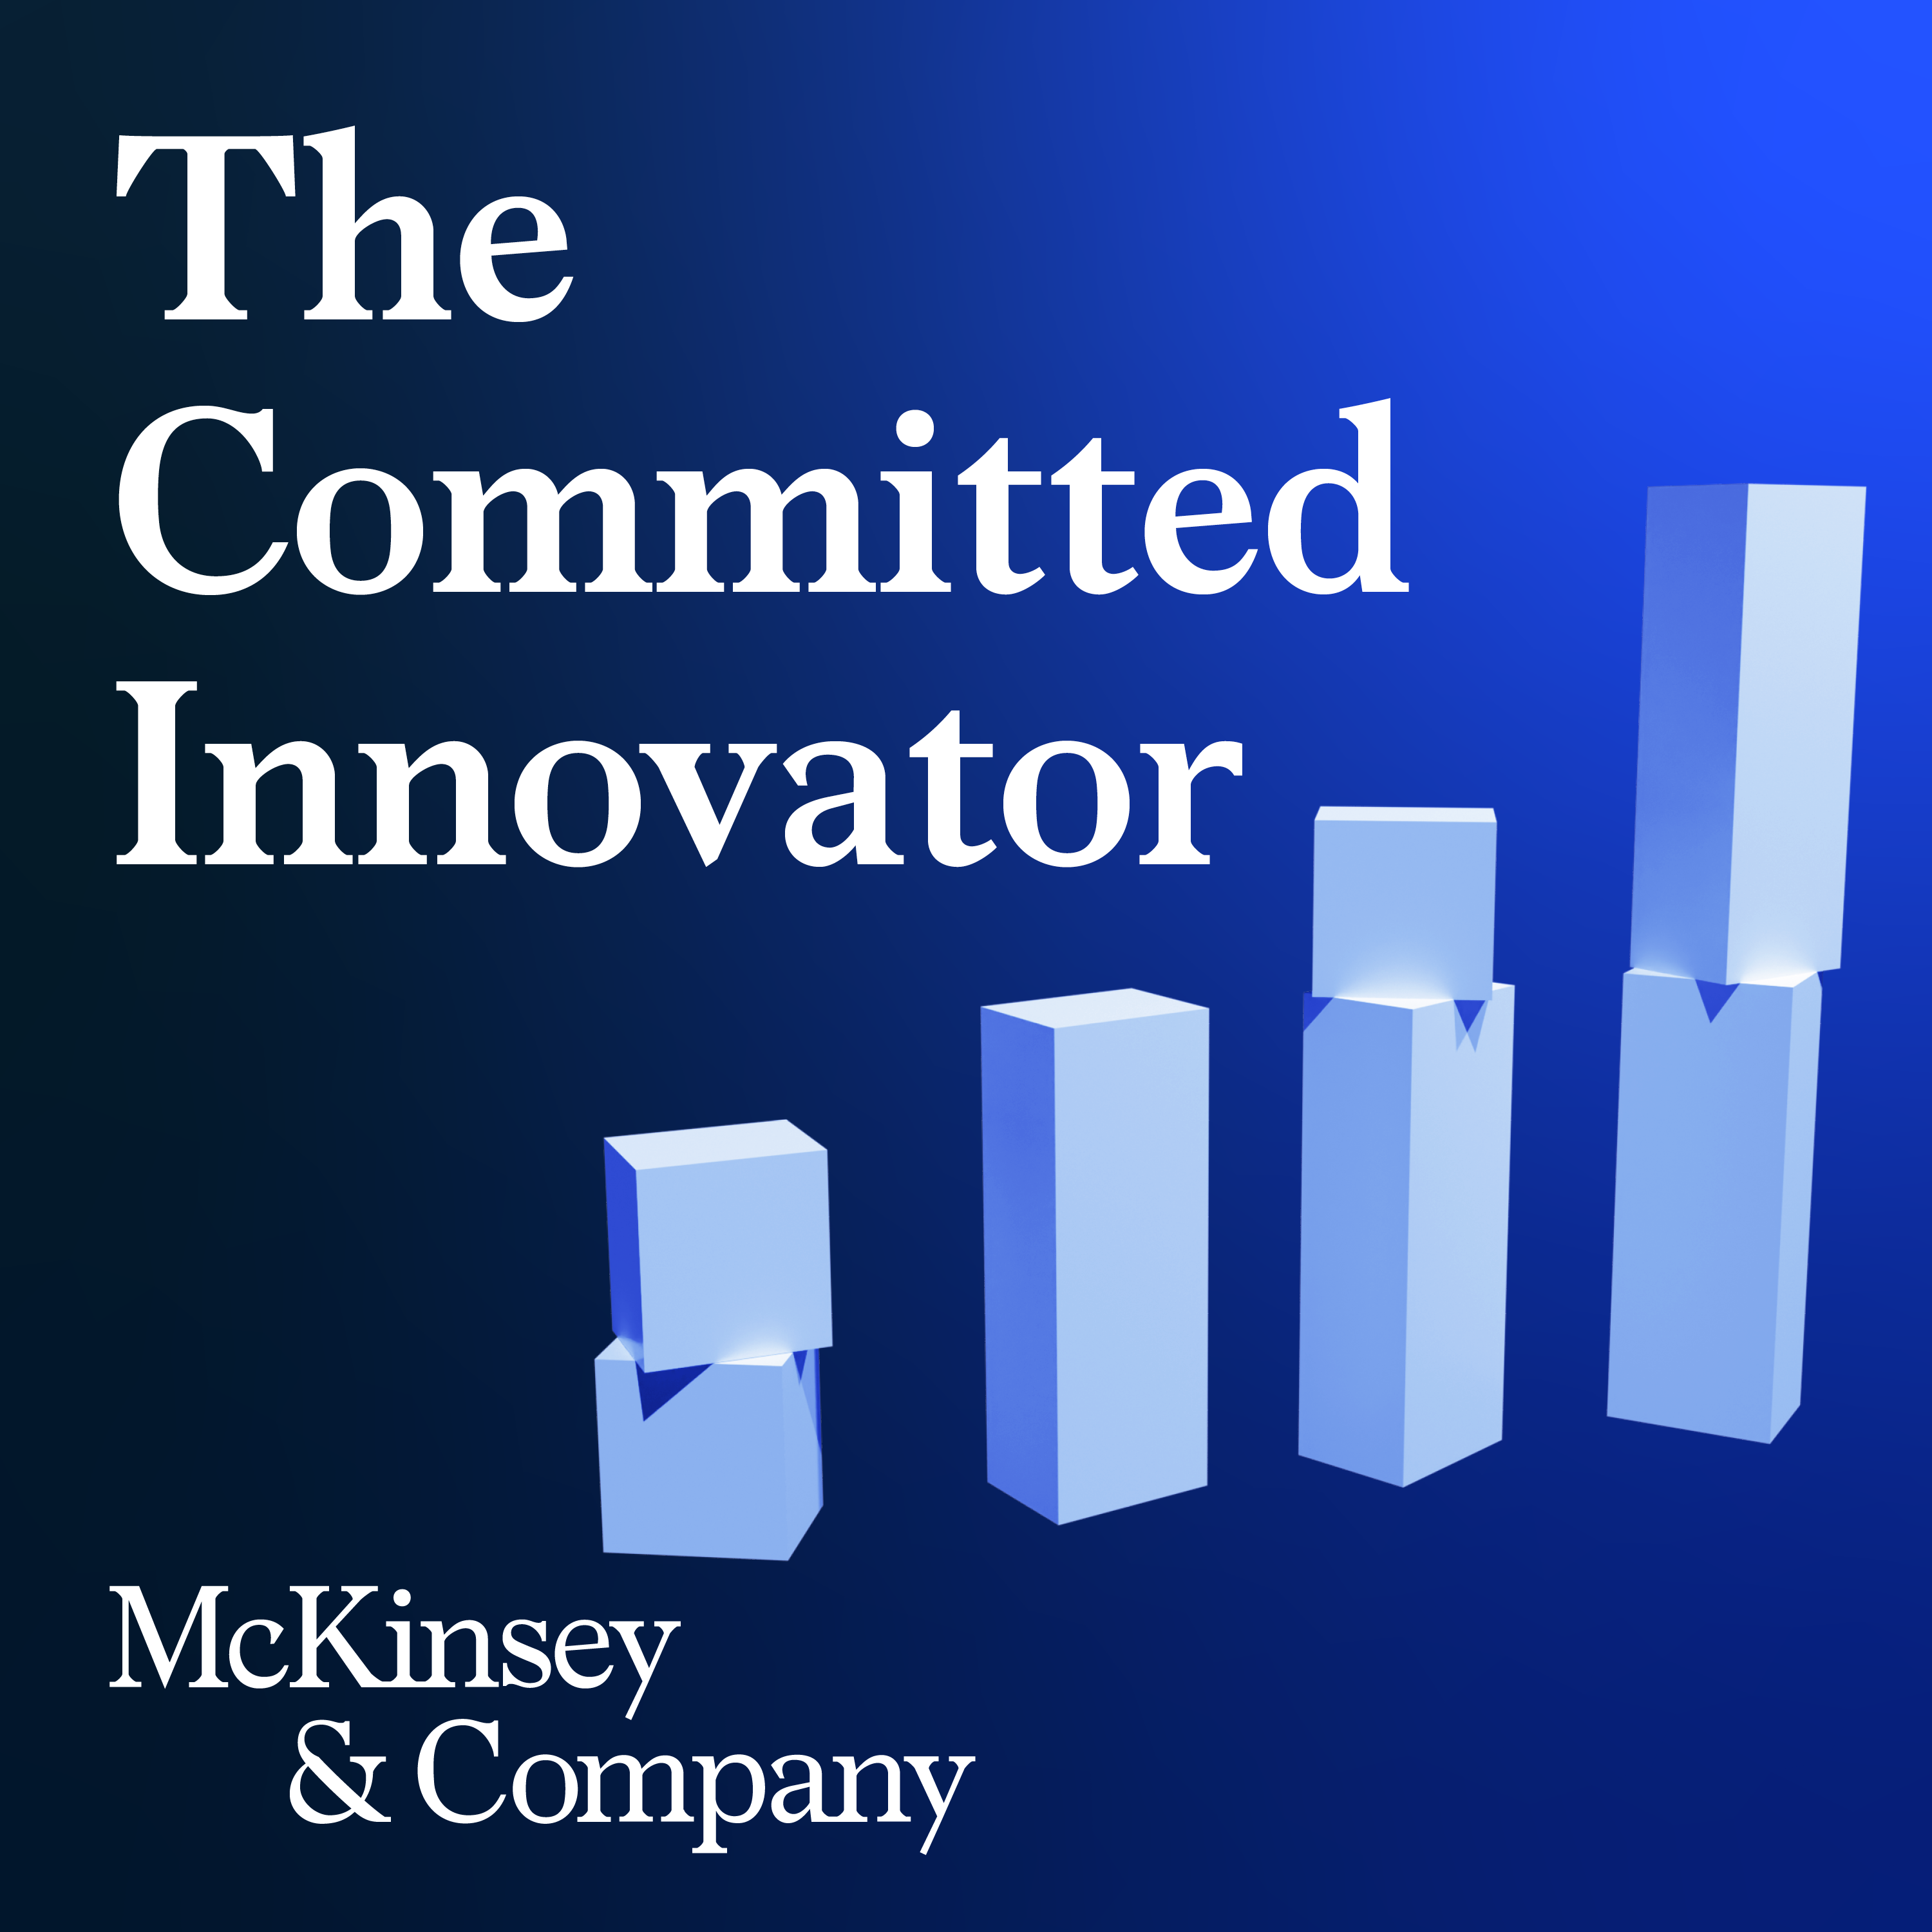 The Committed Innovator